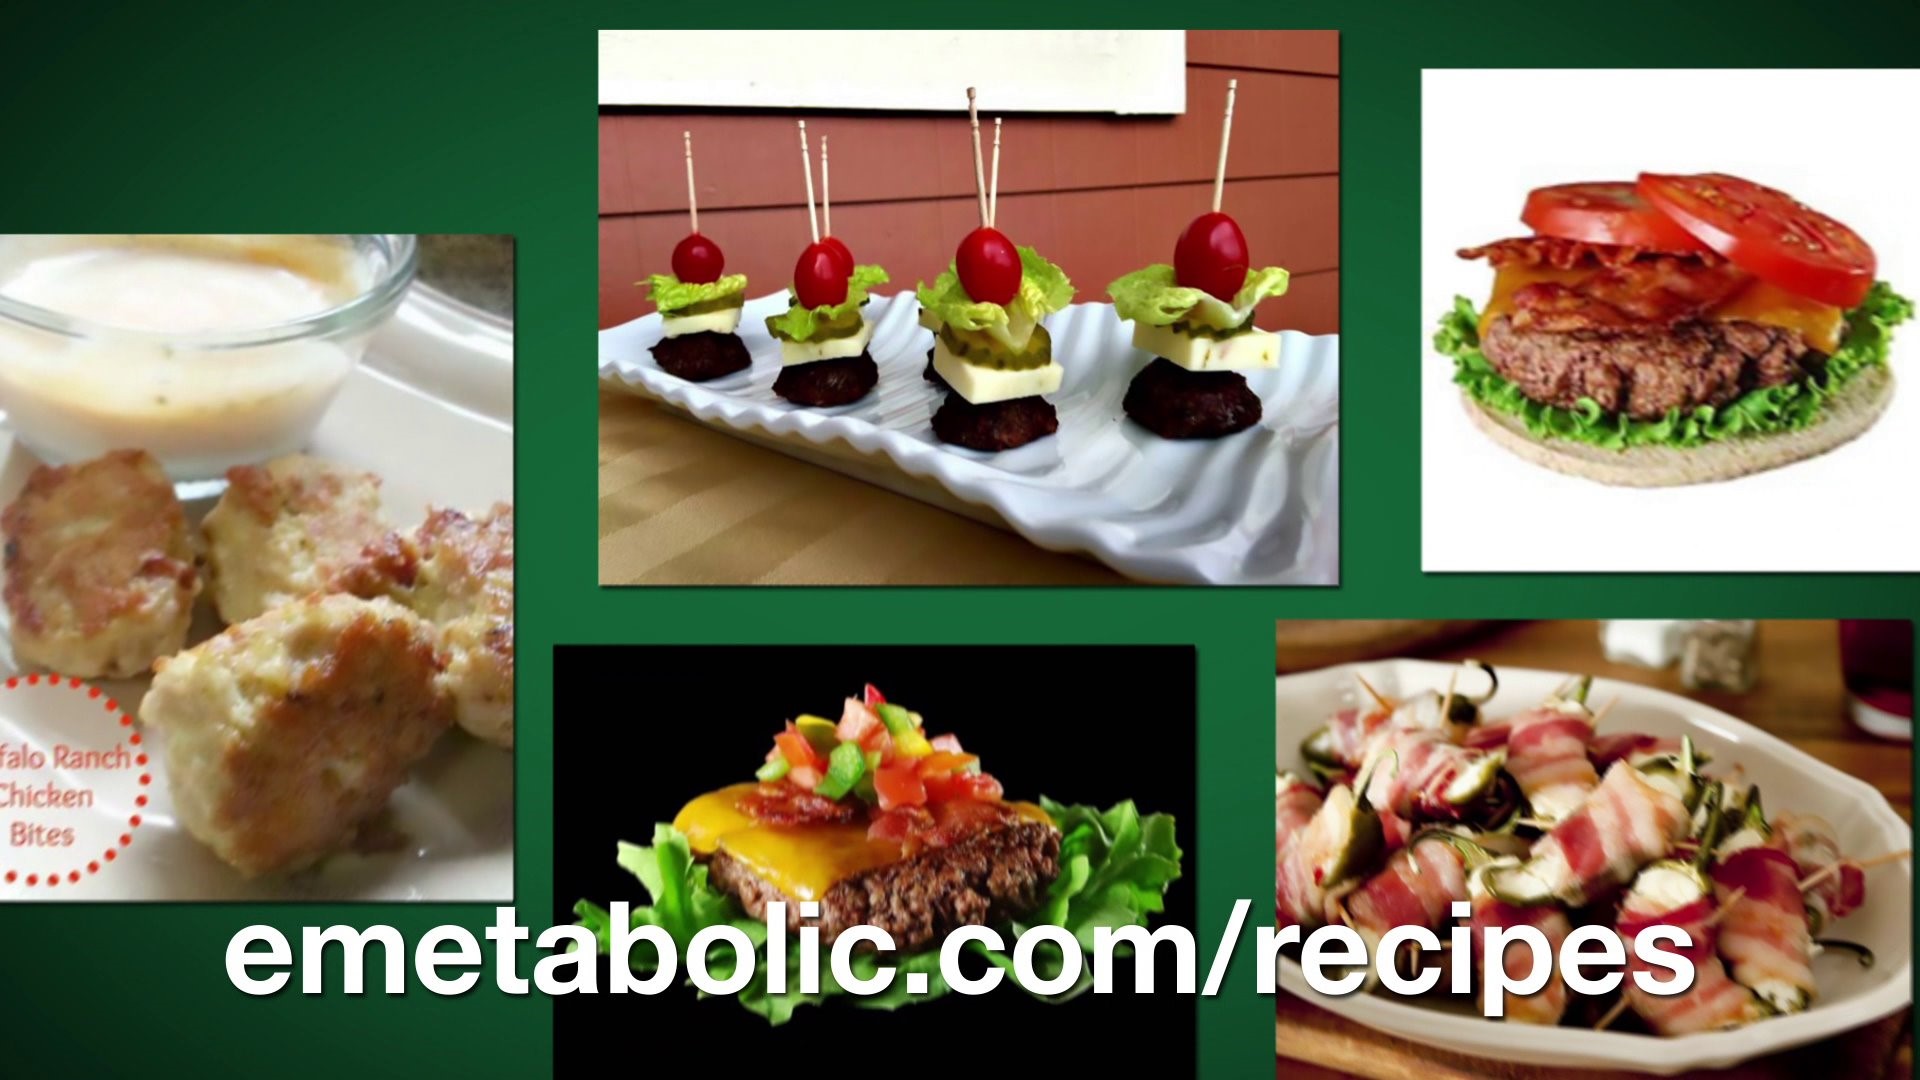 Metabolic Research Center: Eating Health at Social Gatherings